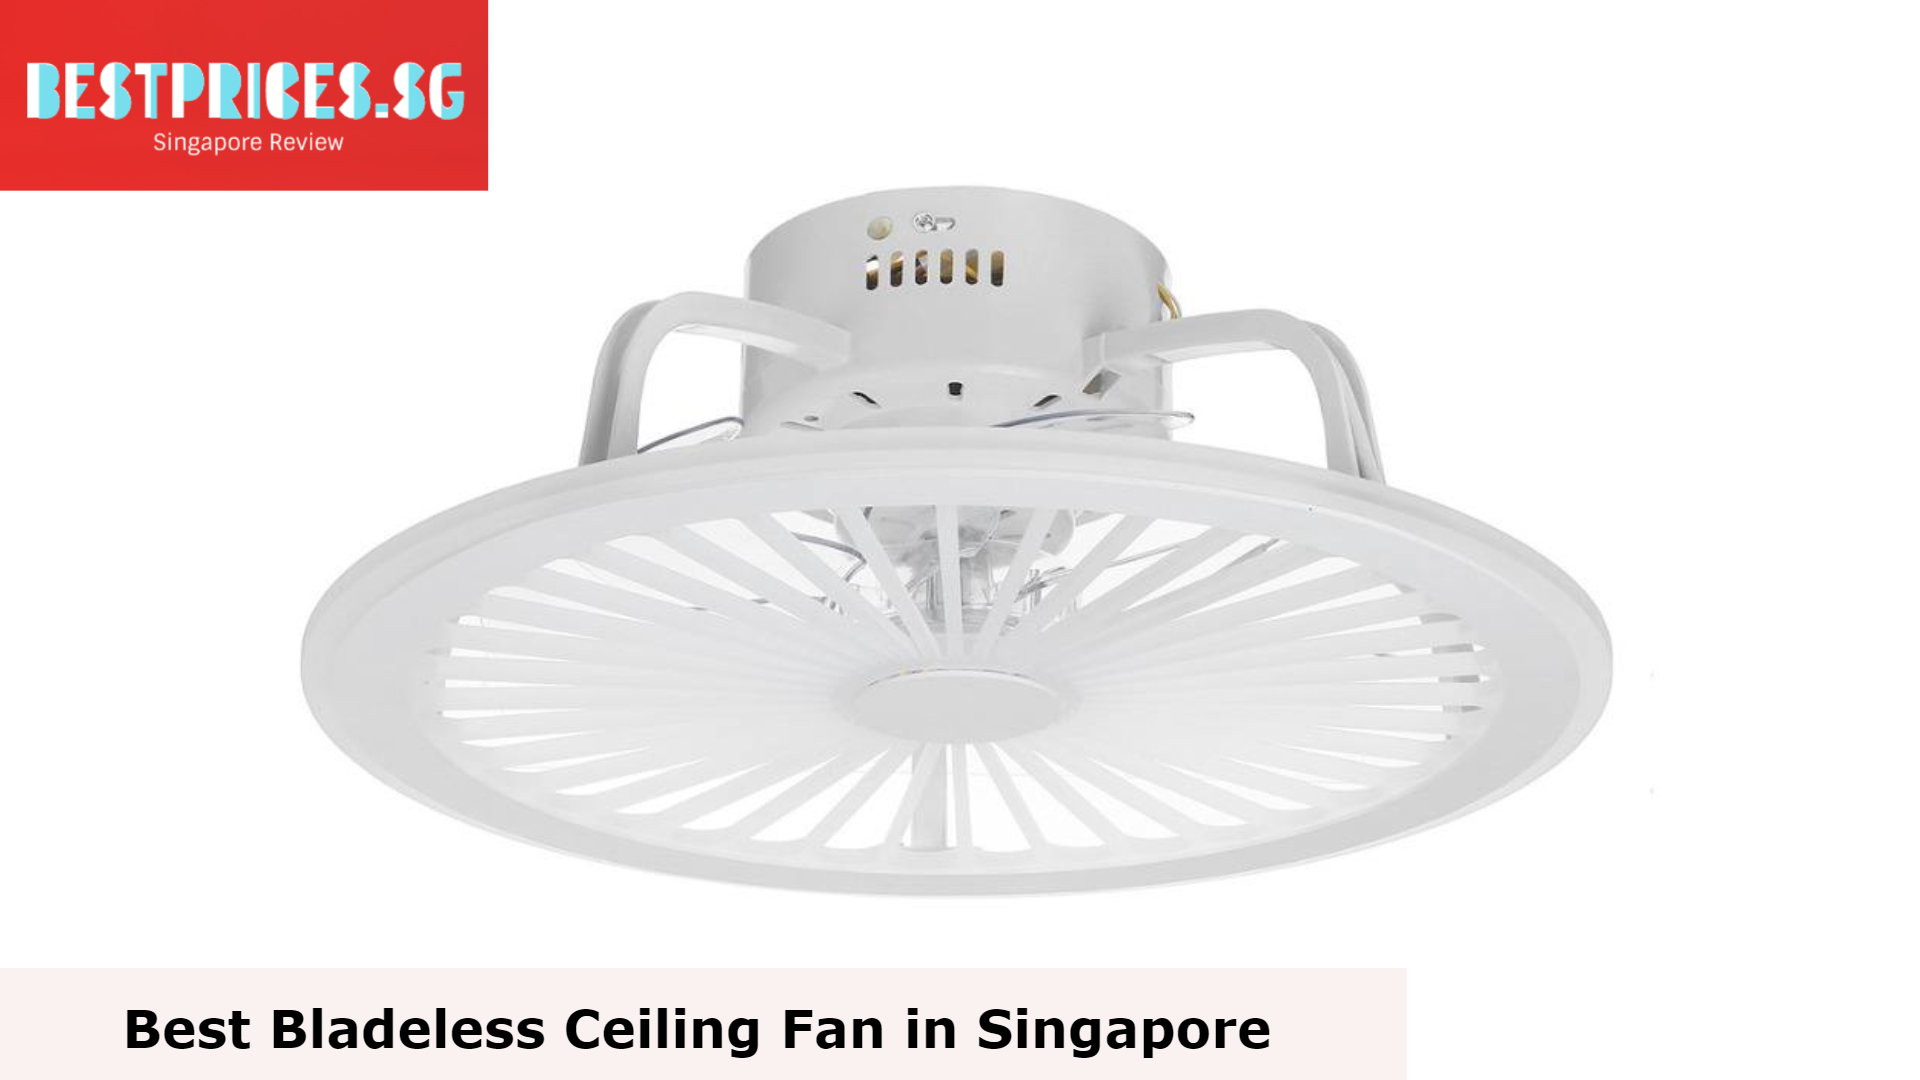 Bluetooth Music Bladeless Ceiling Fan - Best Bladeless Ceiling Fan in Singapore, Bladeless Ceiling Fan Singapore, Are bladeless ceiling fans any good?, Are bladeless fans better than ceiling fans?, Is there such a thing as a bladeless ceiling fan?, Does bladeless fan work?, Are bladeless fans more powerful?, 
Do invisible ceiling fans work?, dyson bladeless ceiling fan, bladeless ceiling fan review, best bladeless ceiling fan, hunter bladeless ceiling fan, elmark bladeless ceiling fan, exhale bladeless ceiling fan singapore review, exhale bladeless ceiling fan, 